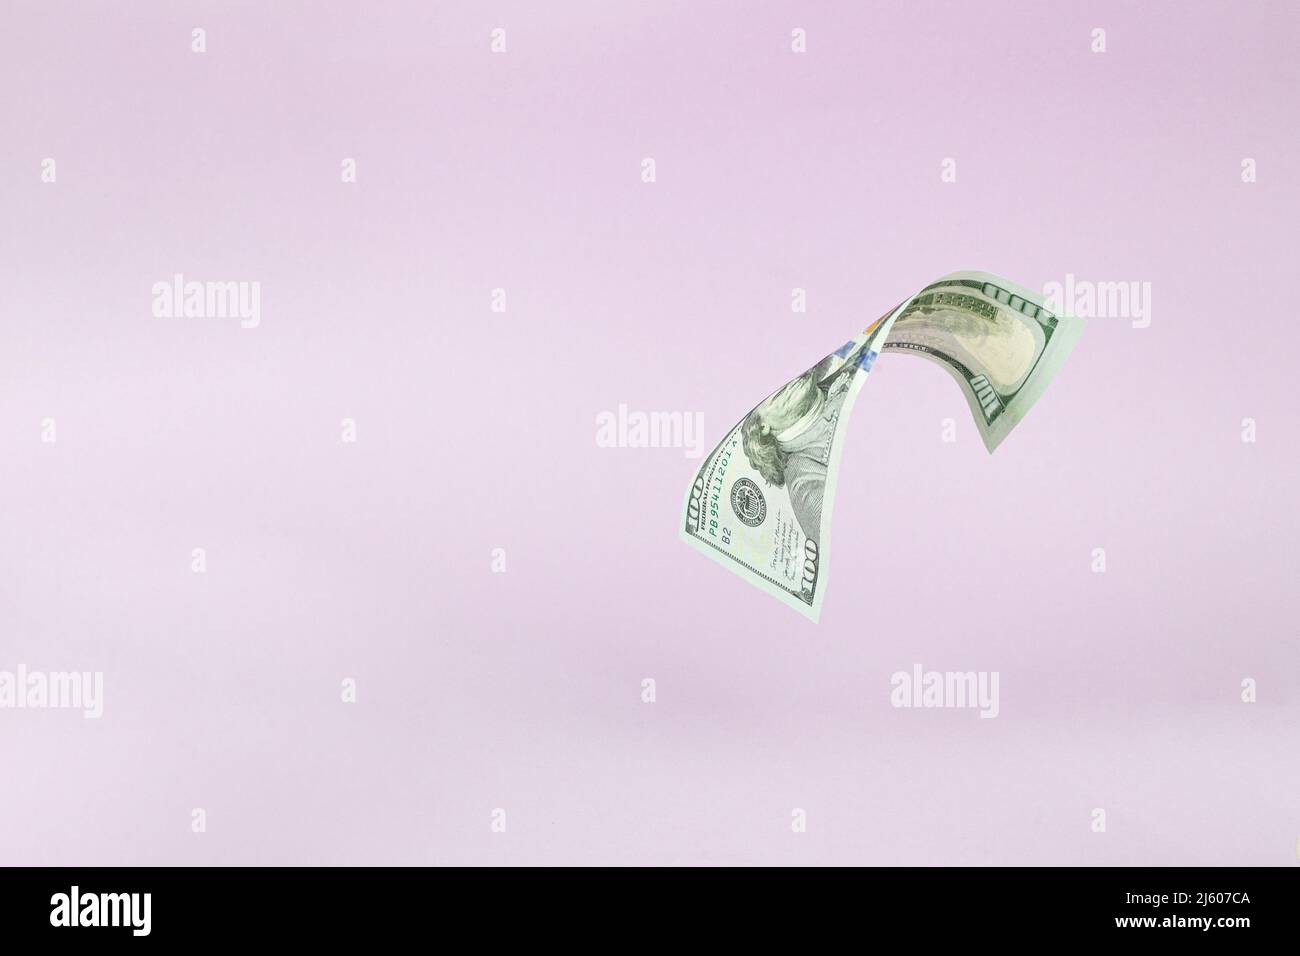 Flying 100 American dollars banknotes, on pink background. US 100 dollar bill close up. Flying money Stock Photo